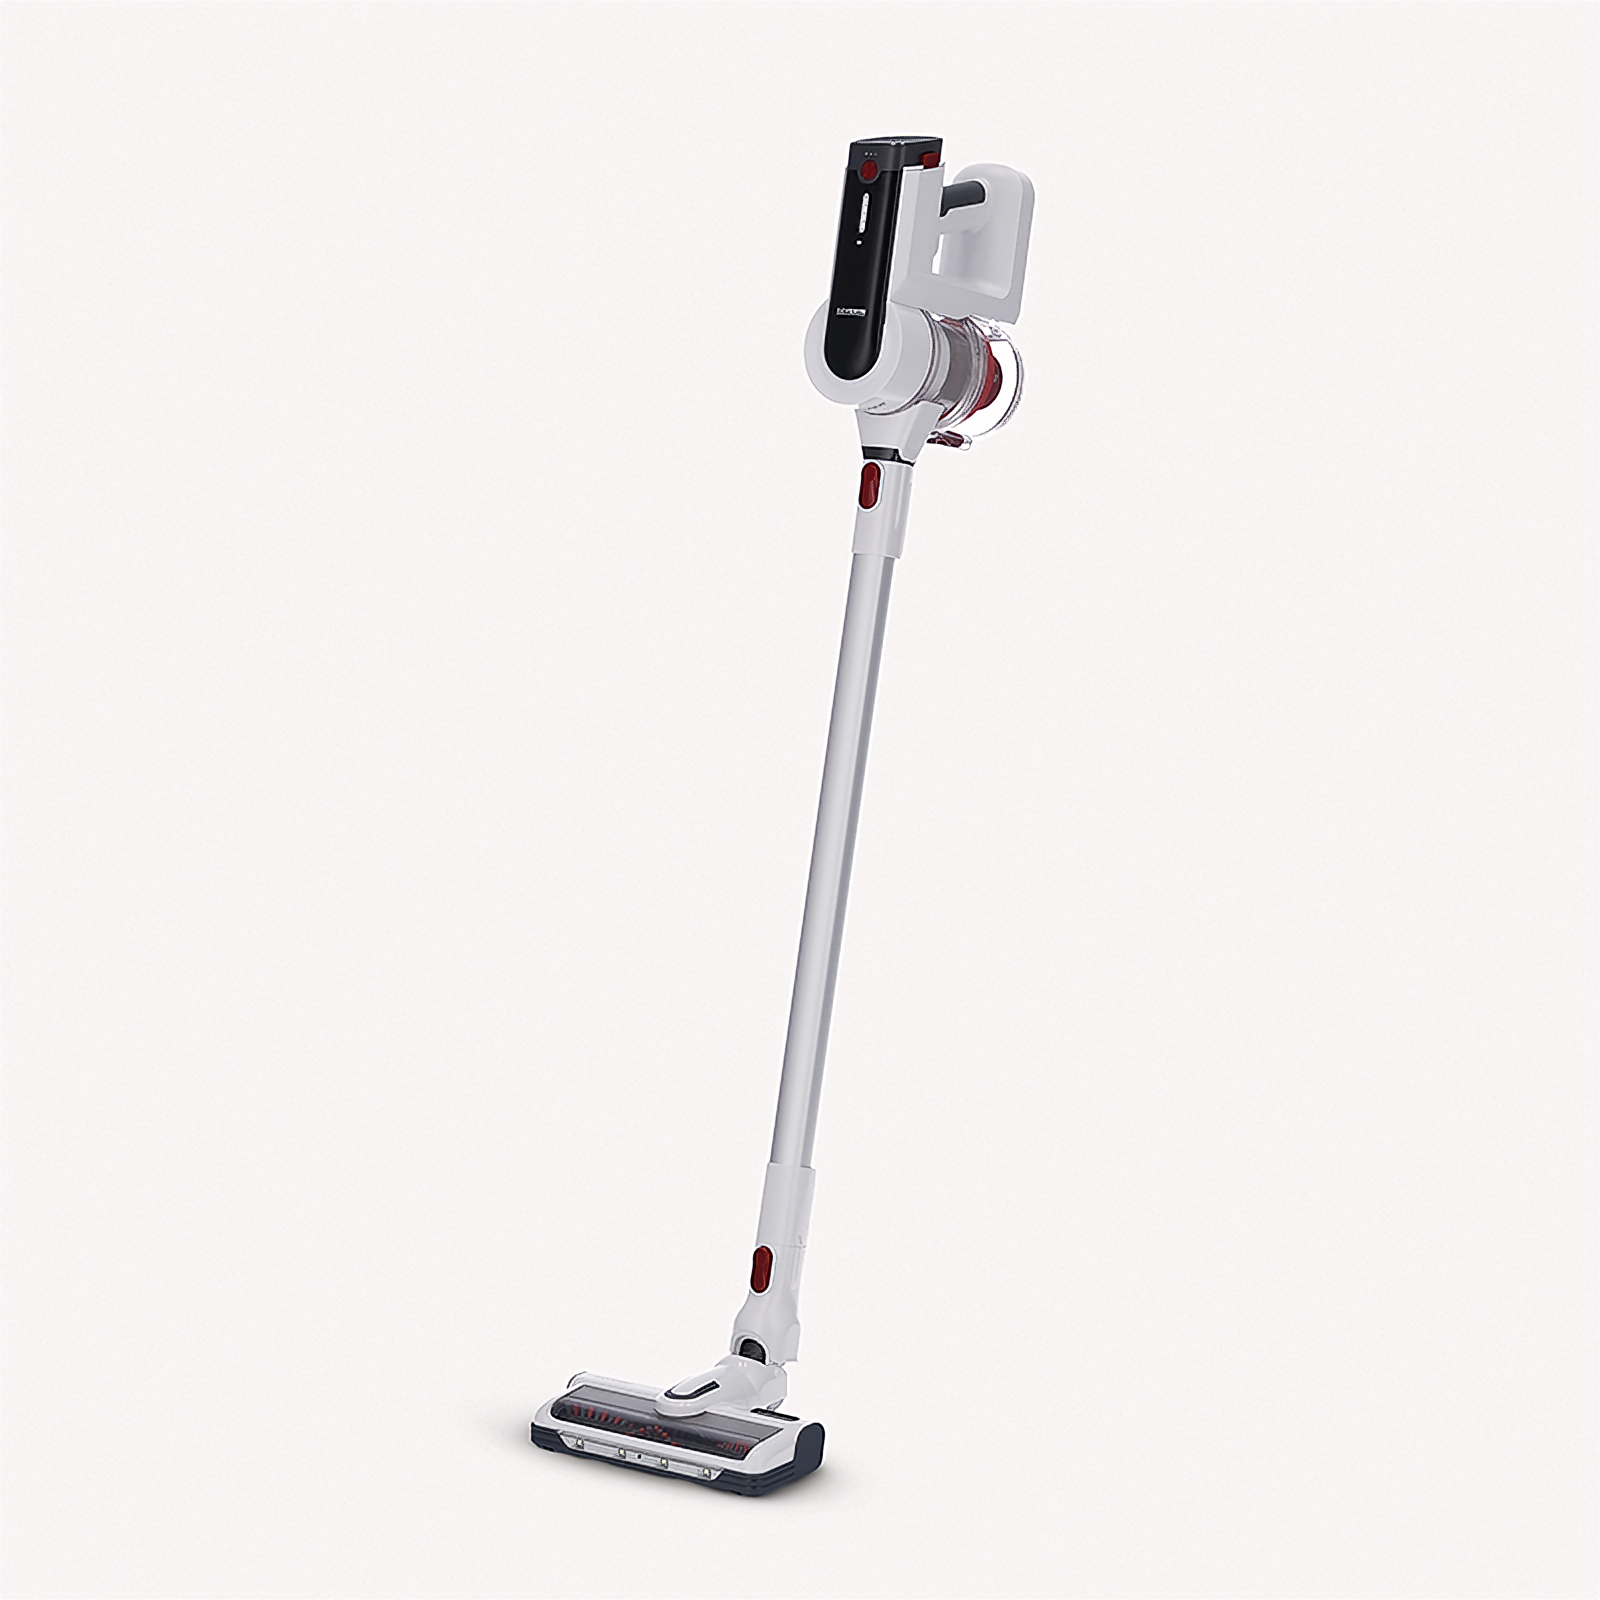 Cordless 2-in-1 hand and vacuum SEVERIN stick (Official) - cleaner 7166 HV